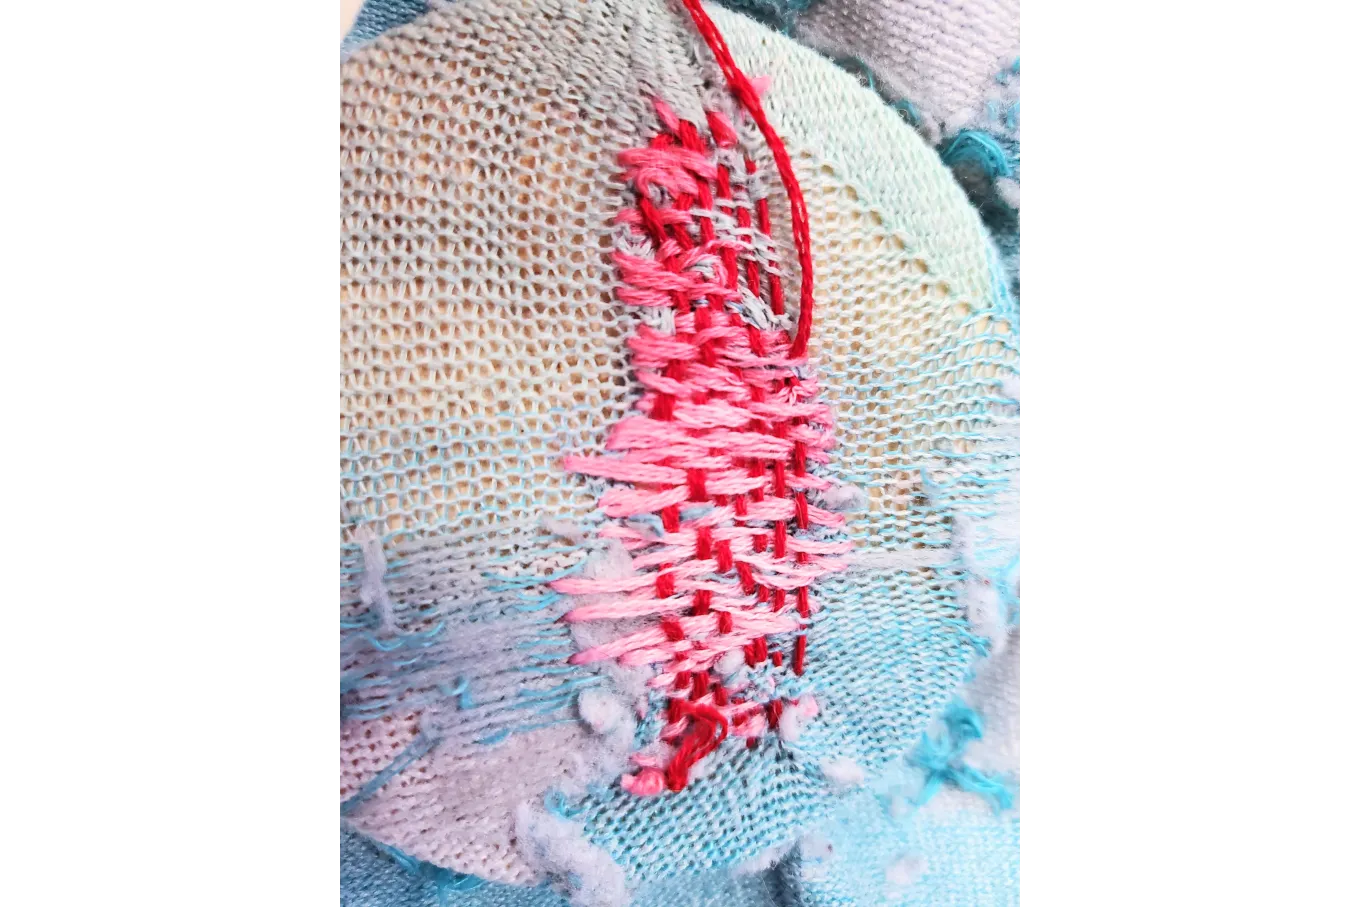 many red threads weave through pink stiches in a blue sock but one group of pink stiches remain